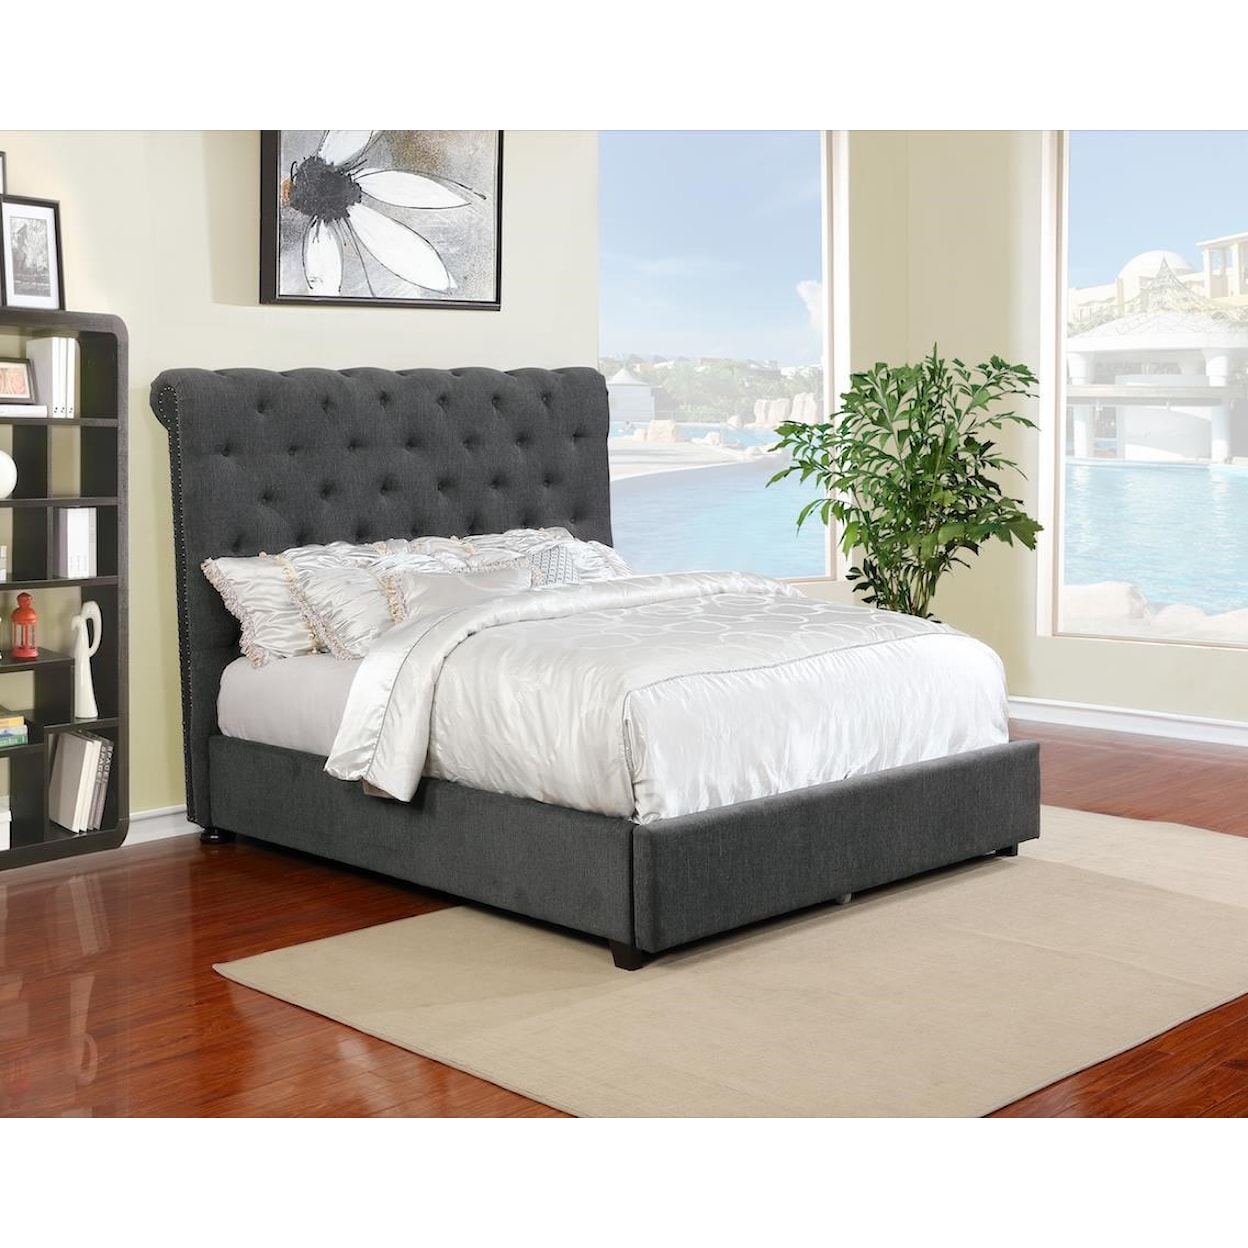 Lifestyle 9361N Queen Upholstered Bed Set